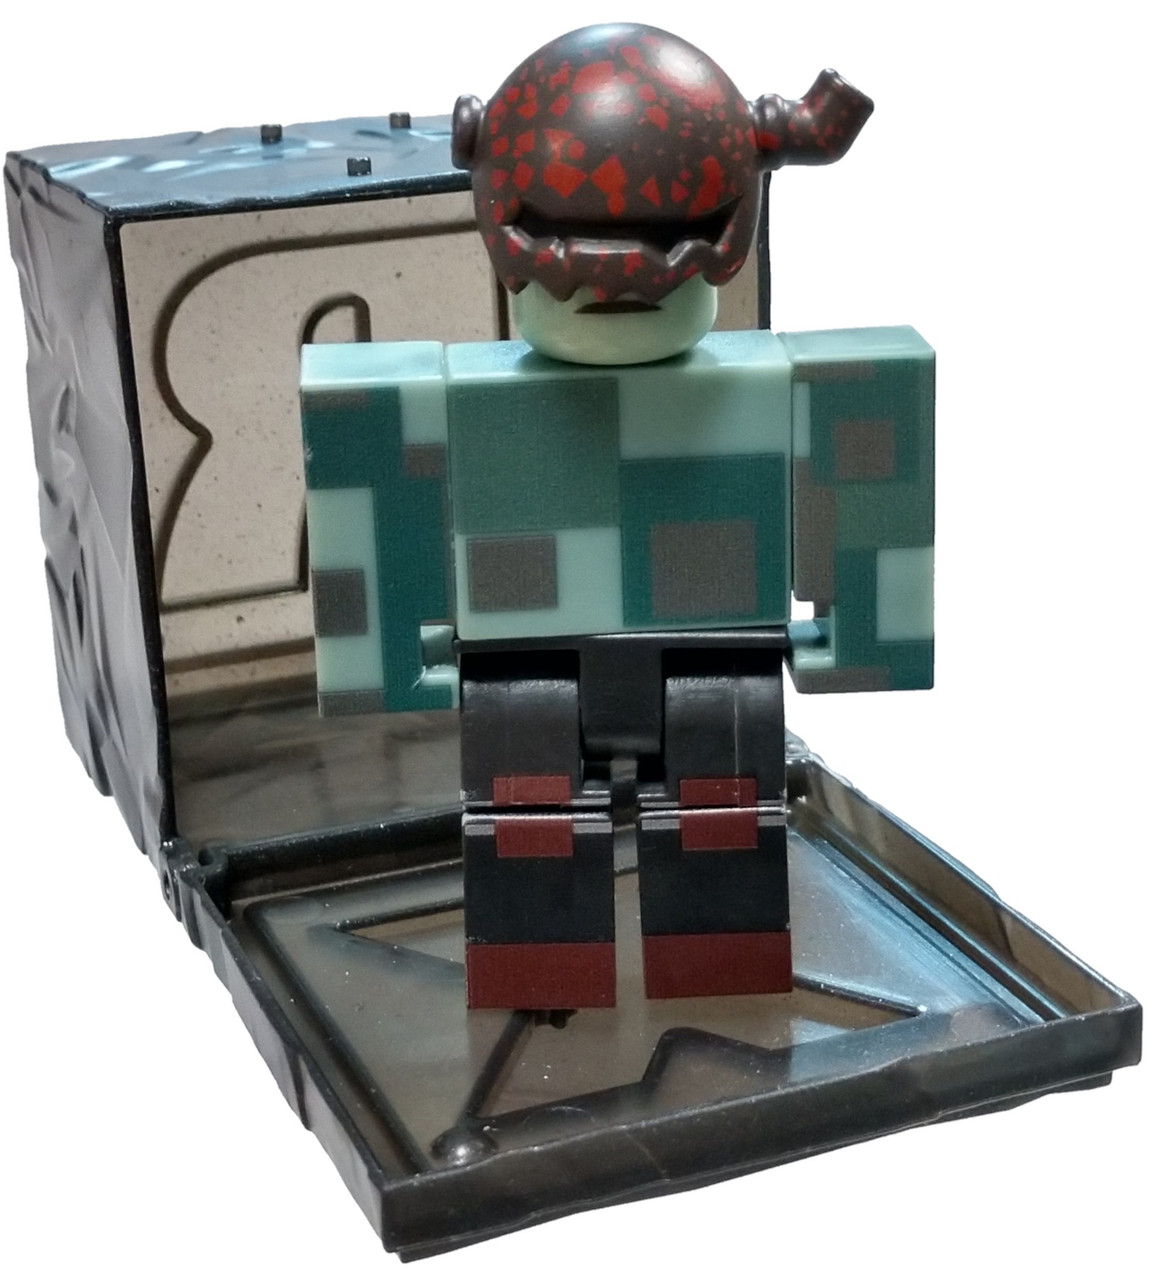 Roblox Series 7 After The Flash Crusher Mutant 3 Mini Figure With Black Cube And Online Code Loose Jazwares Toywiz - zombie officer roblox toy what game is he from